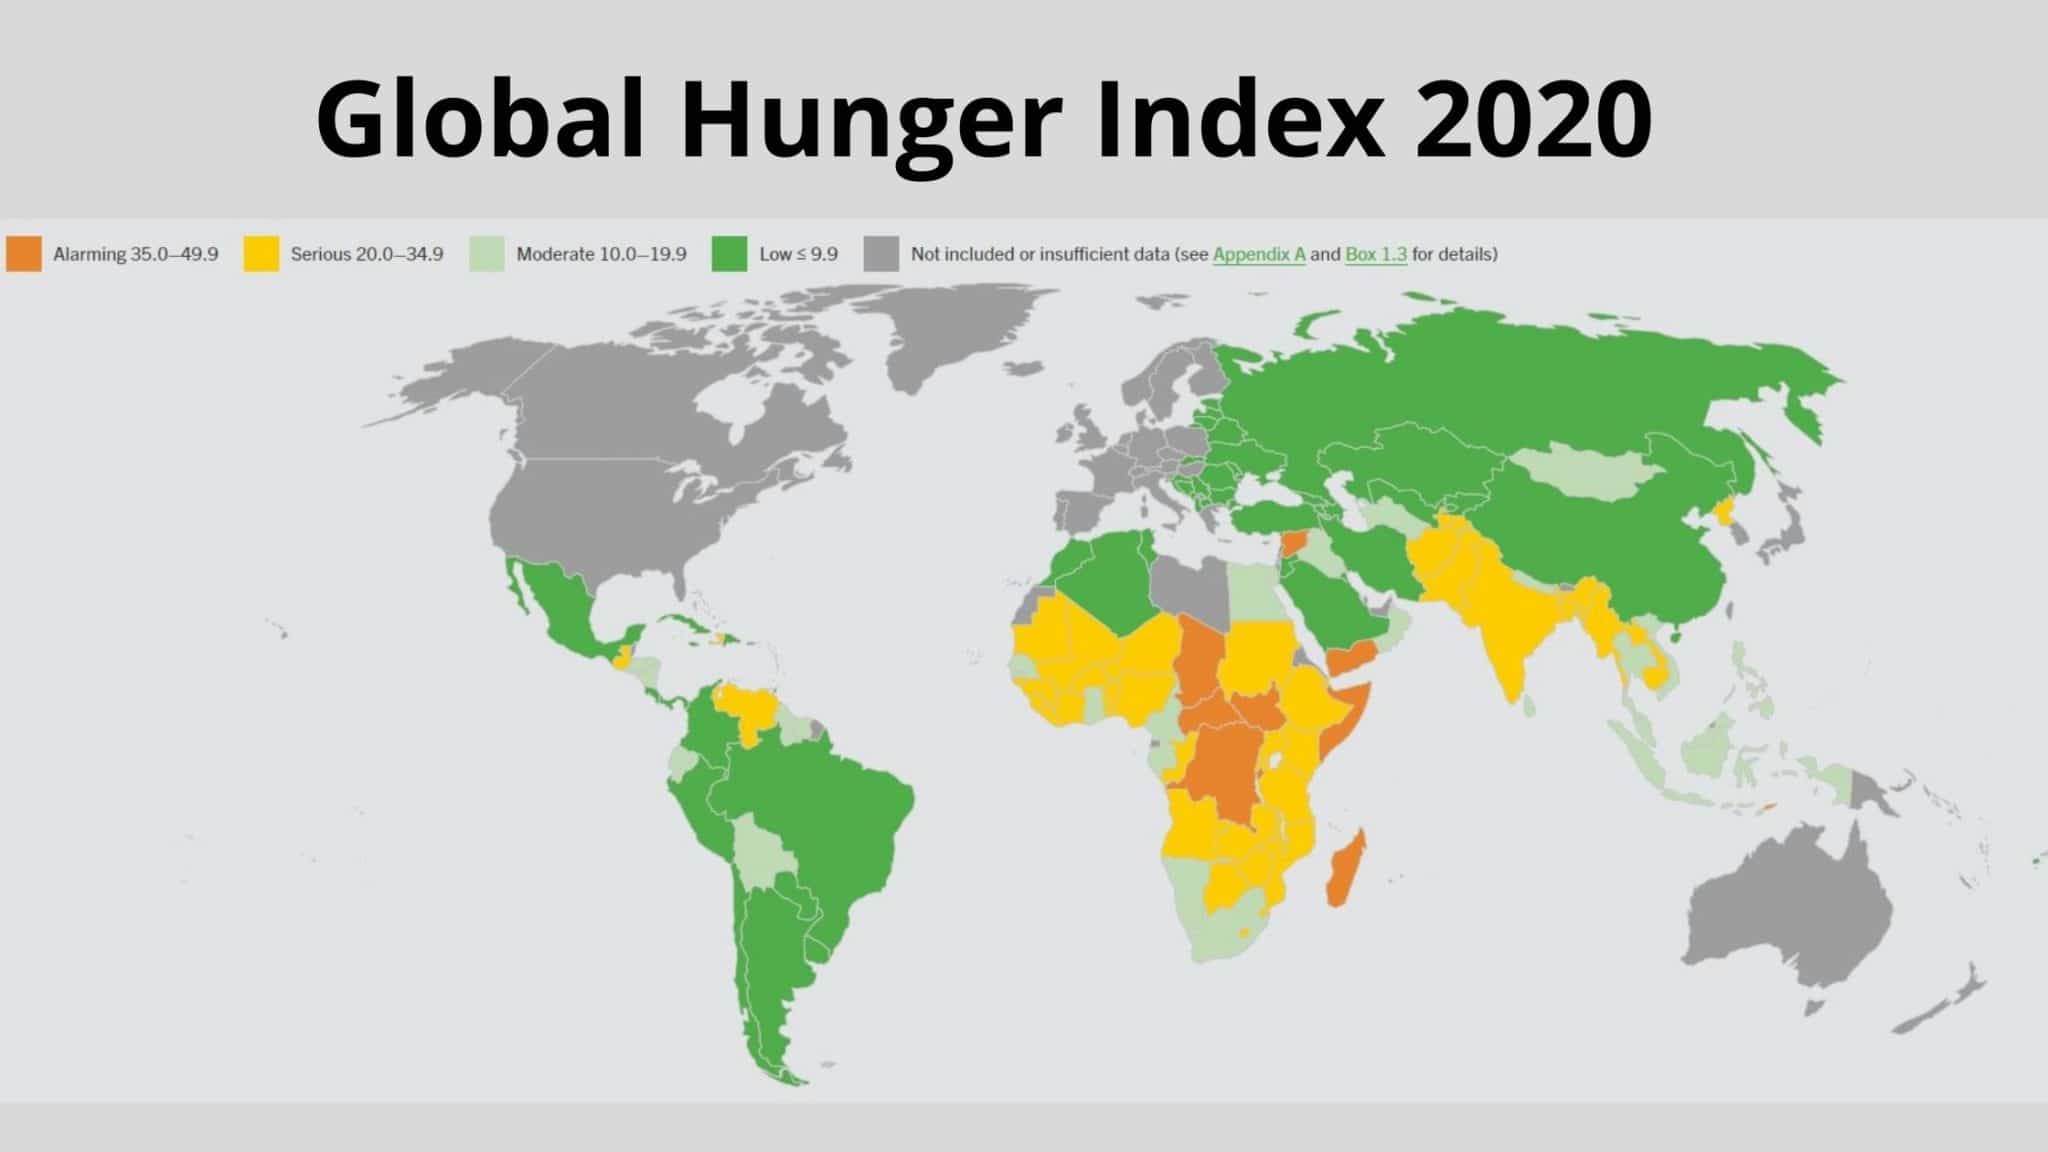 Global Hunger Index 4 Worst Affected Countries? What Strategies To